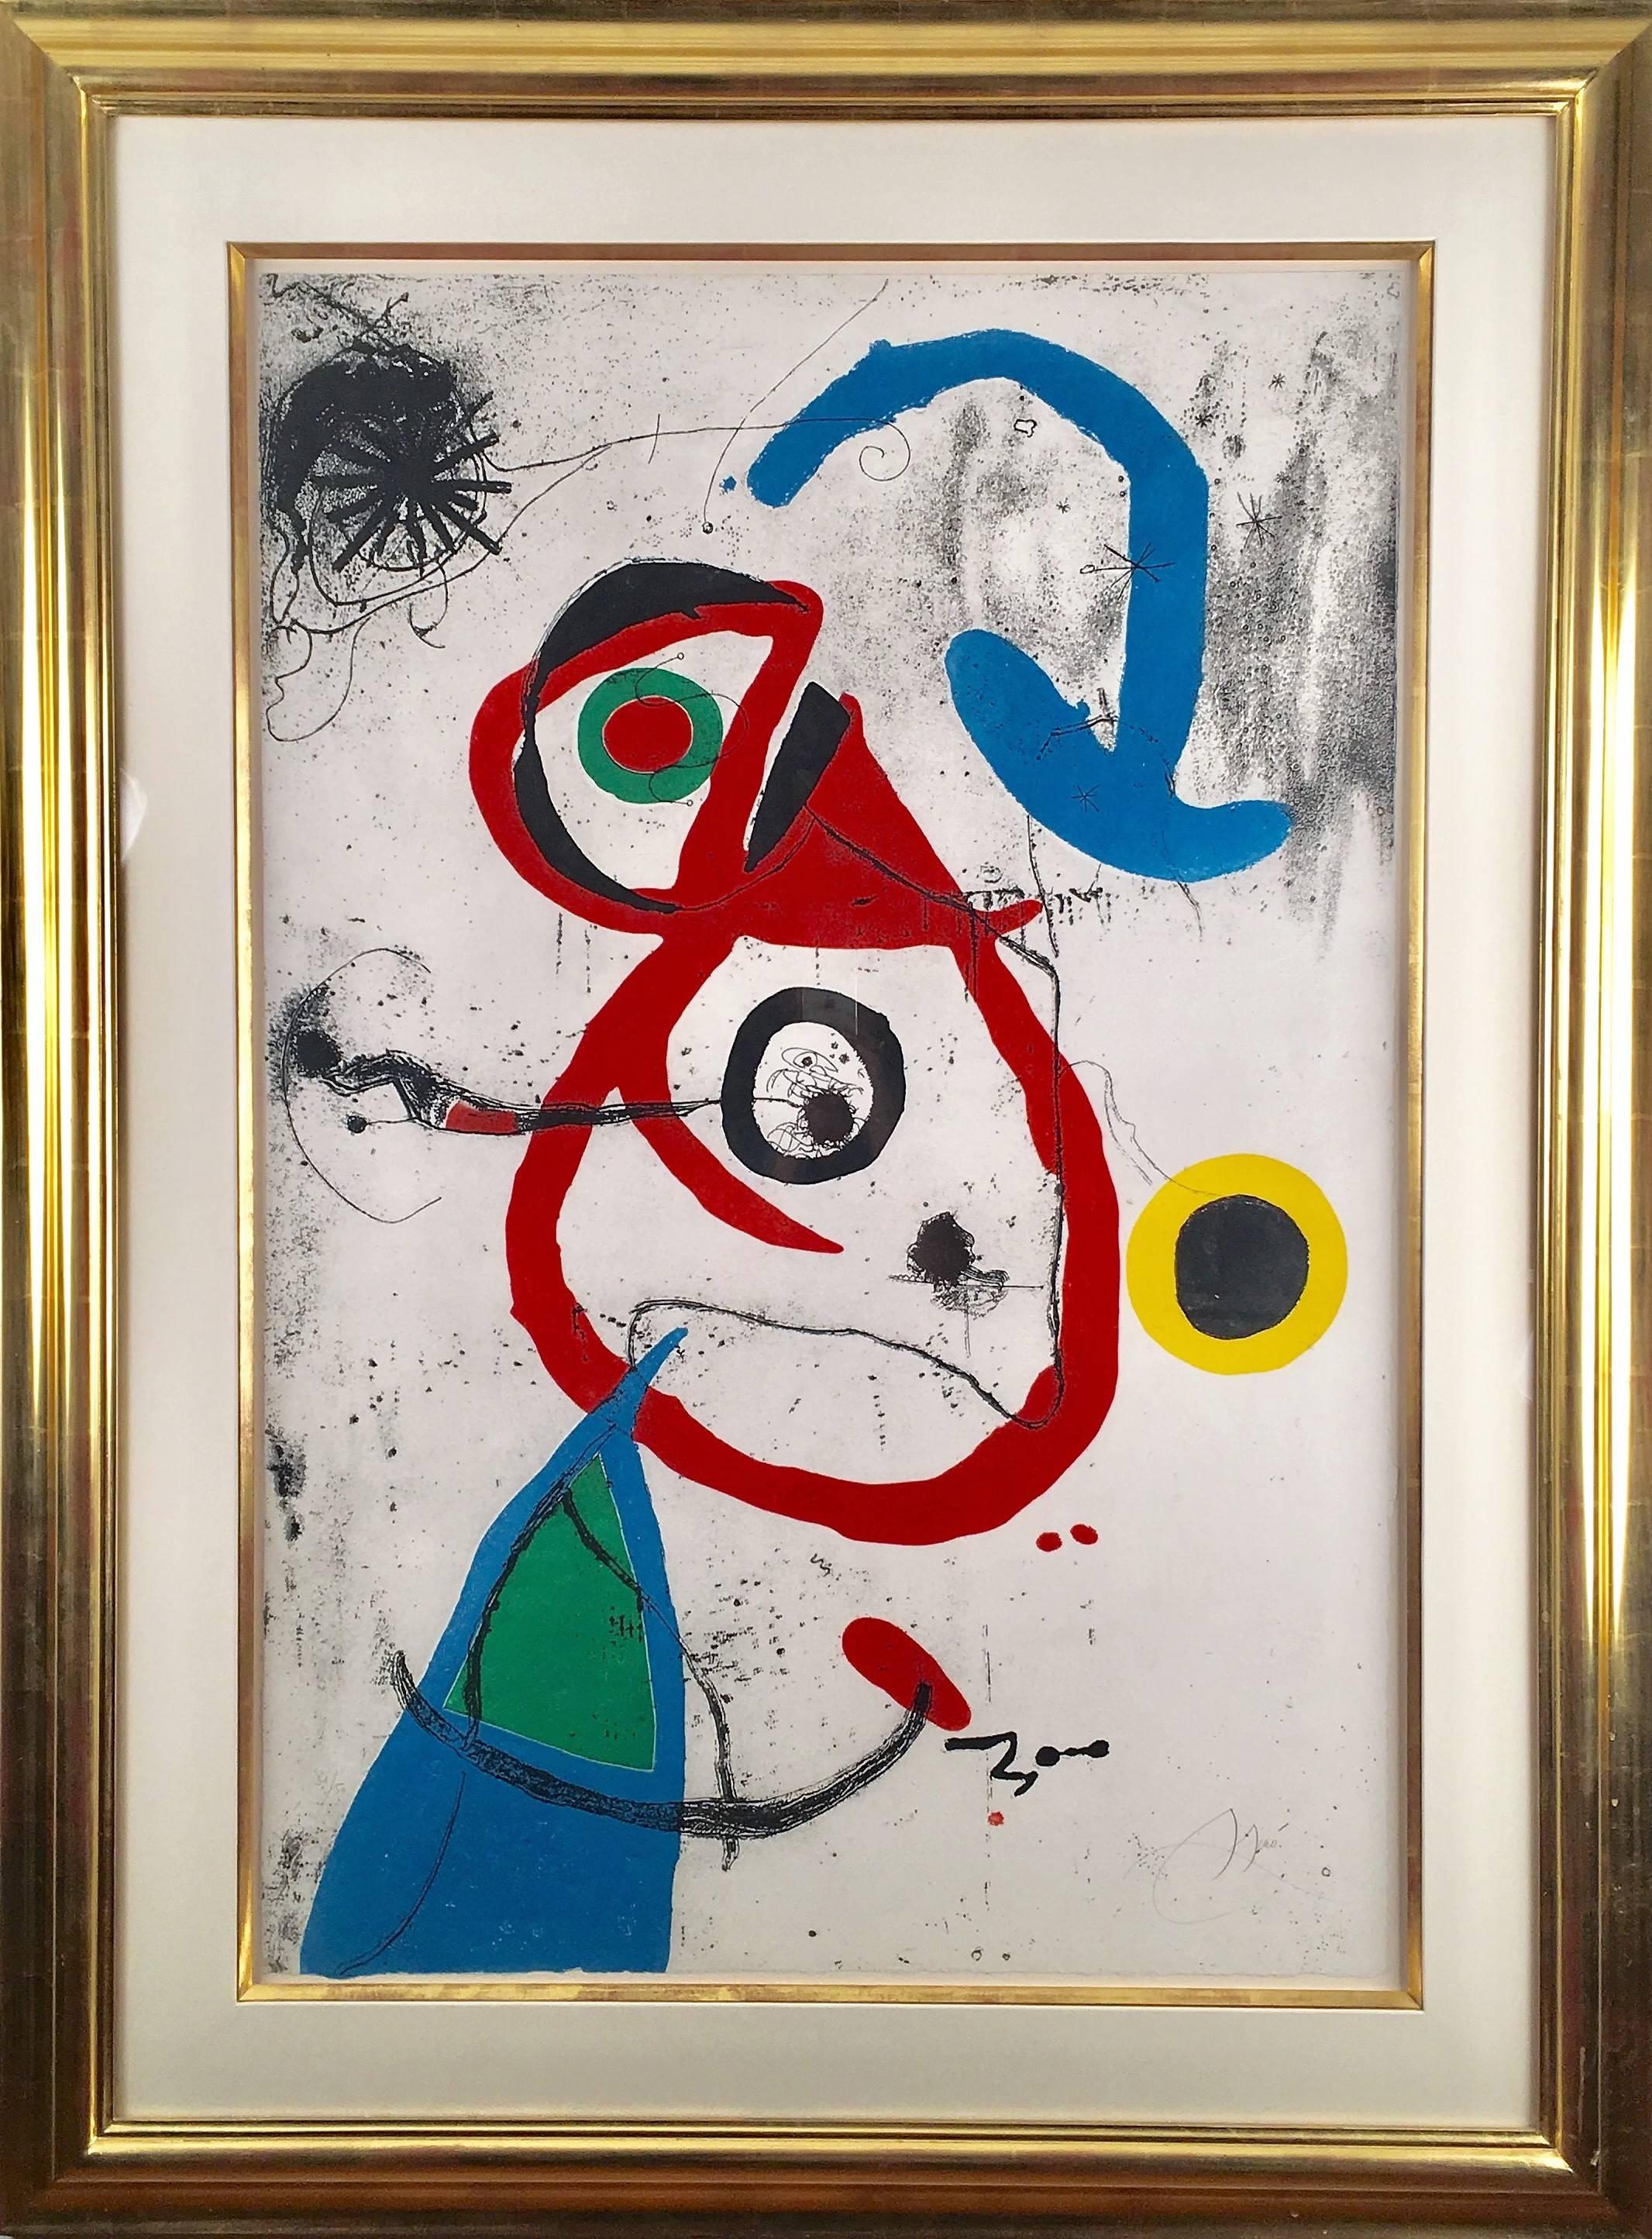 From the Barcelona Suite D.600 - Print by Joan Miró